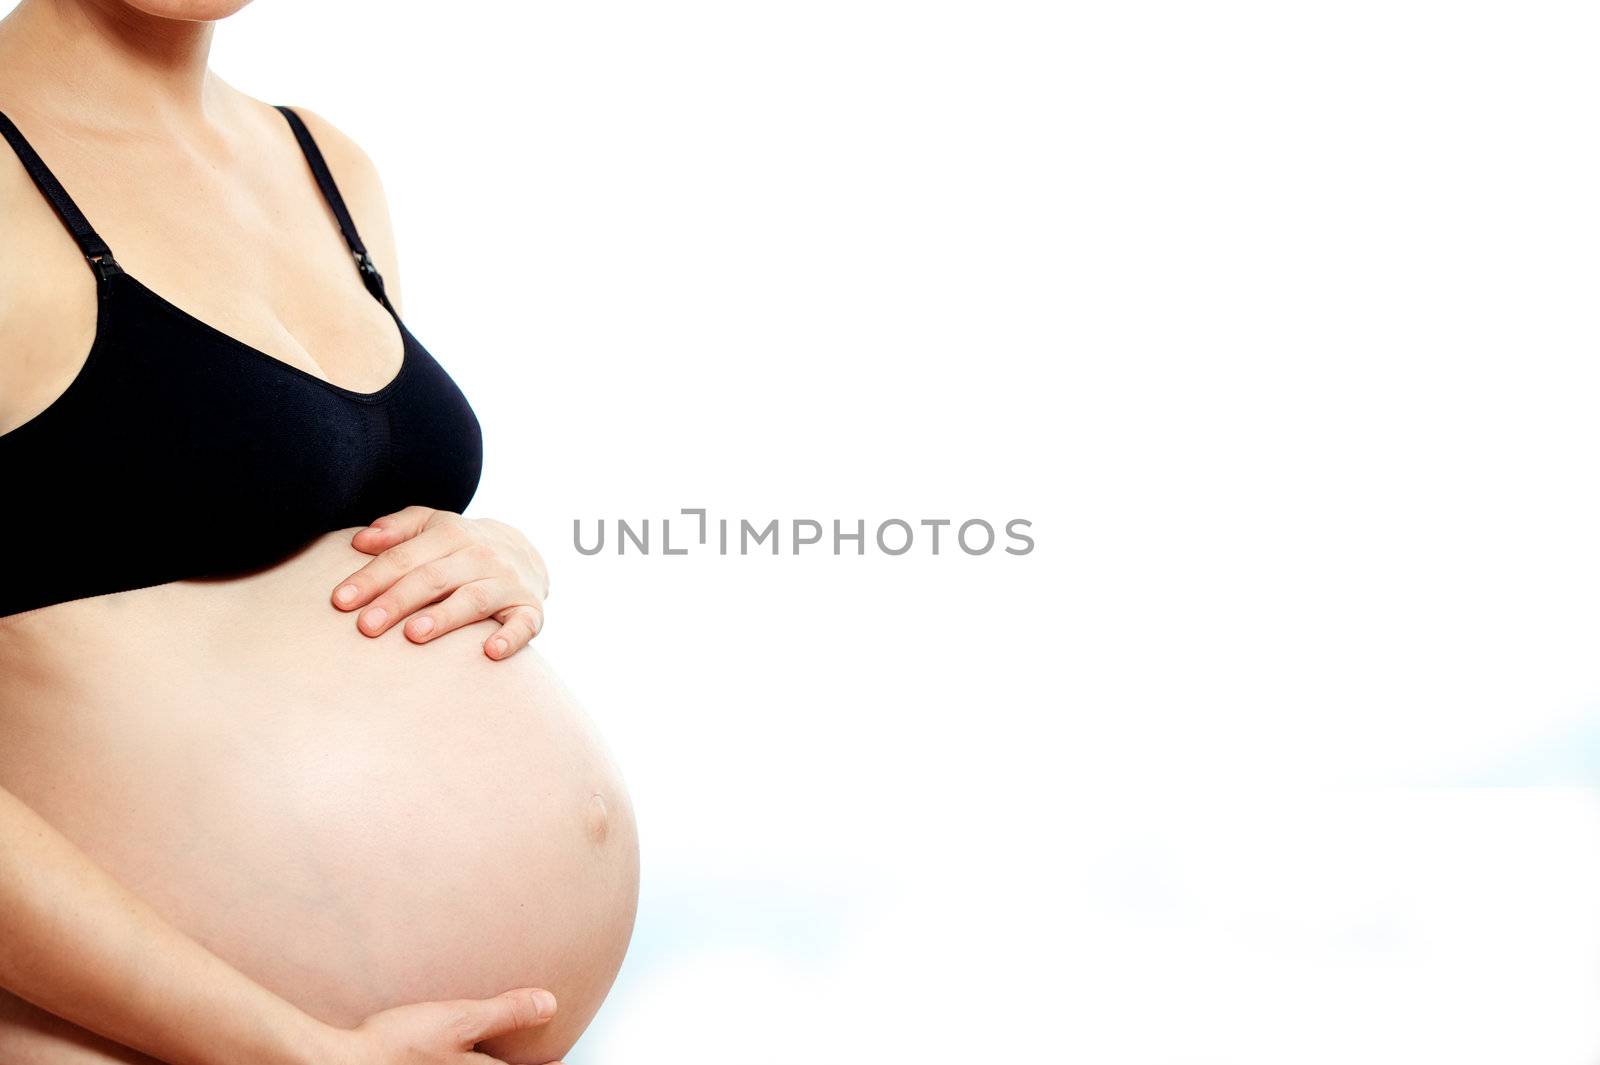 Sideways cropped portrait of a pregnant woman caressing her belly with her hands as she bonds with her unborn child isolated on white with copyspace